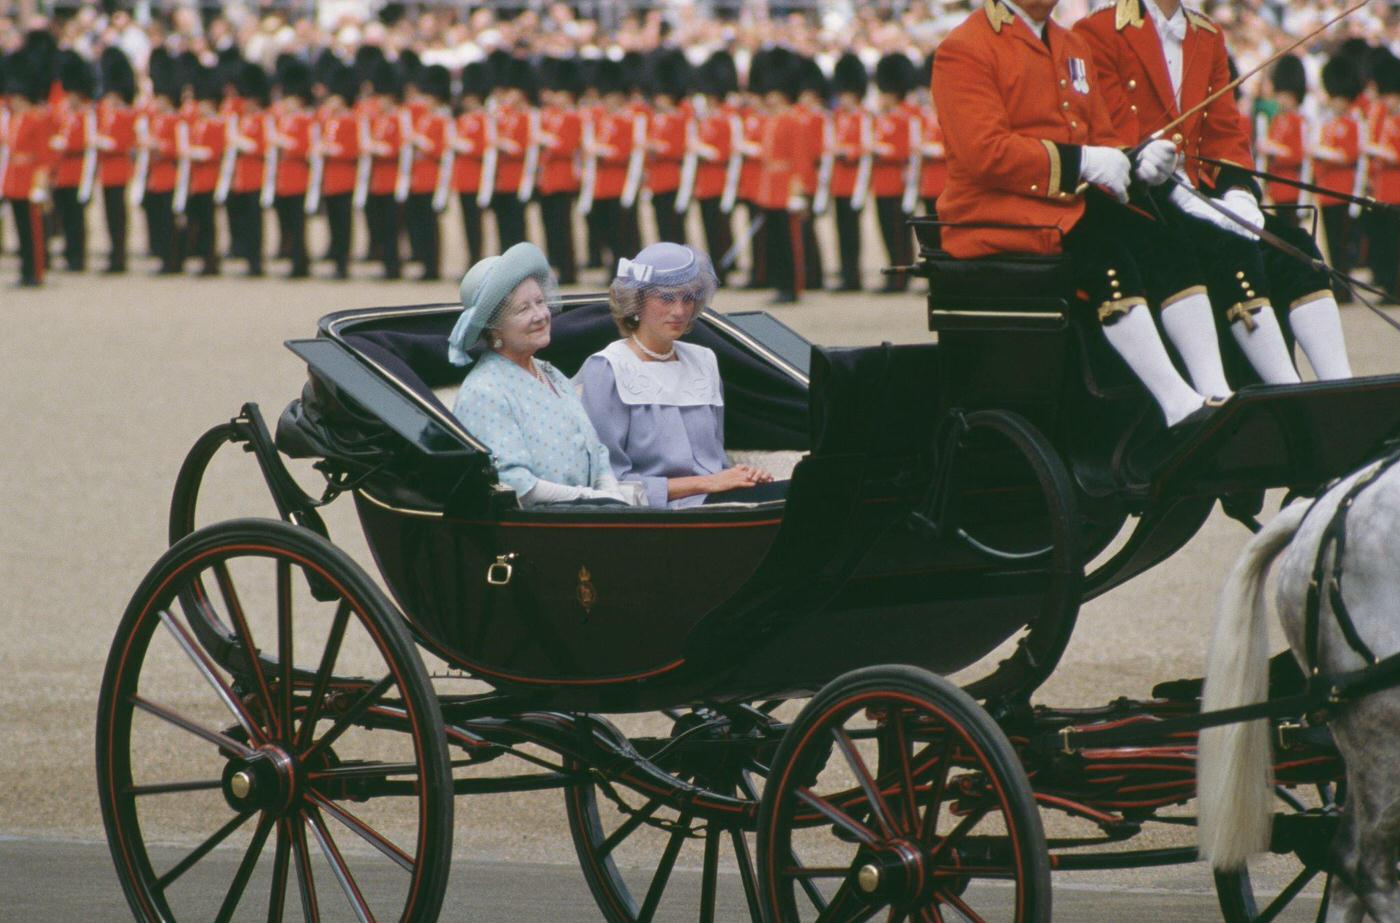 The Queen Mother and Diana, Princess of Wales, in a carriage outside Buckingham Palace in London during the Trooping the Colour ceremony, 1984.